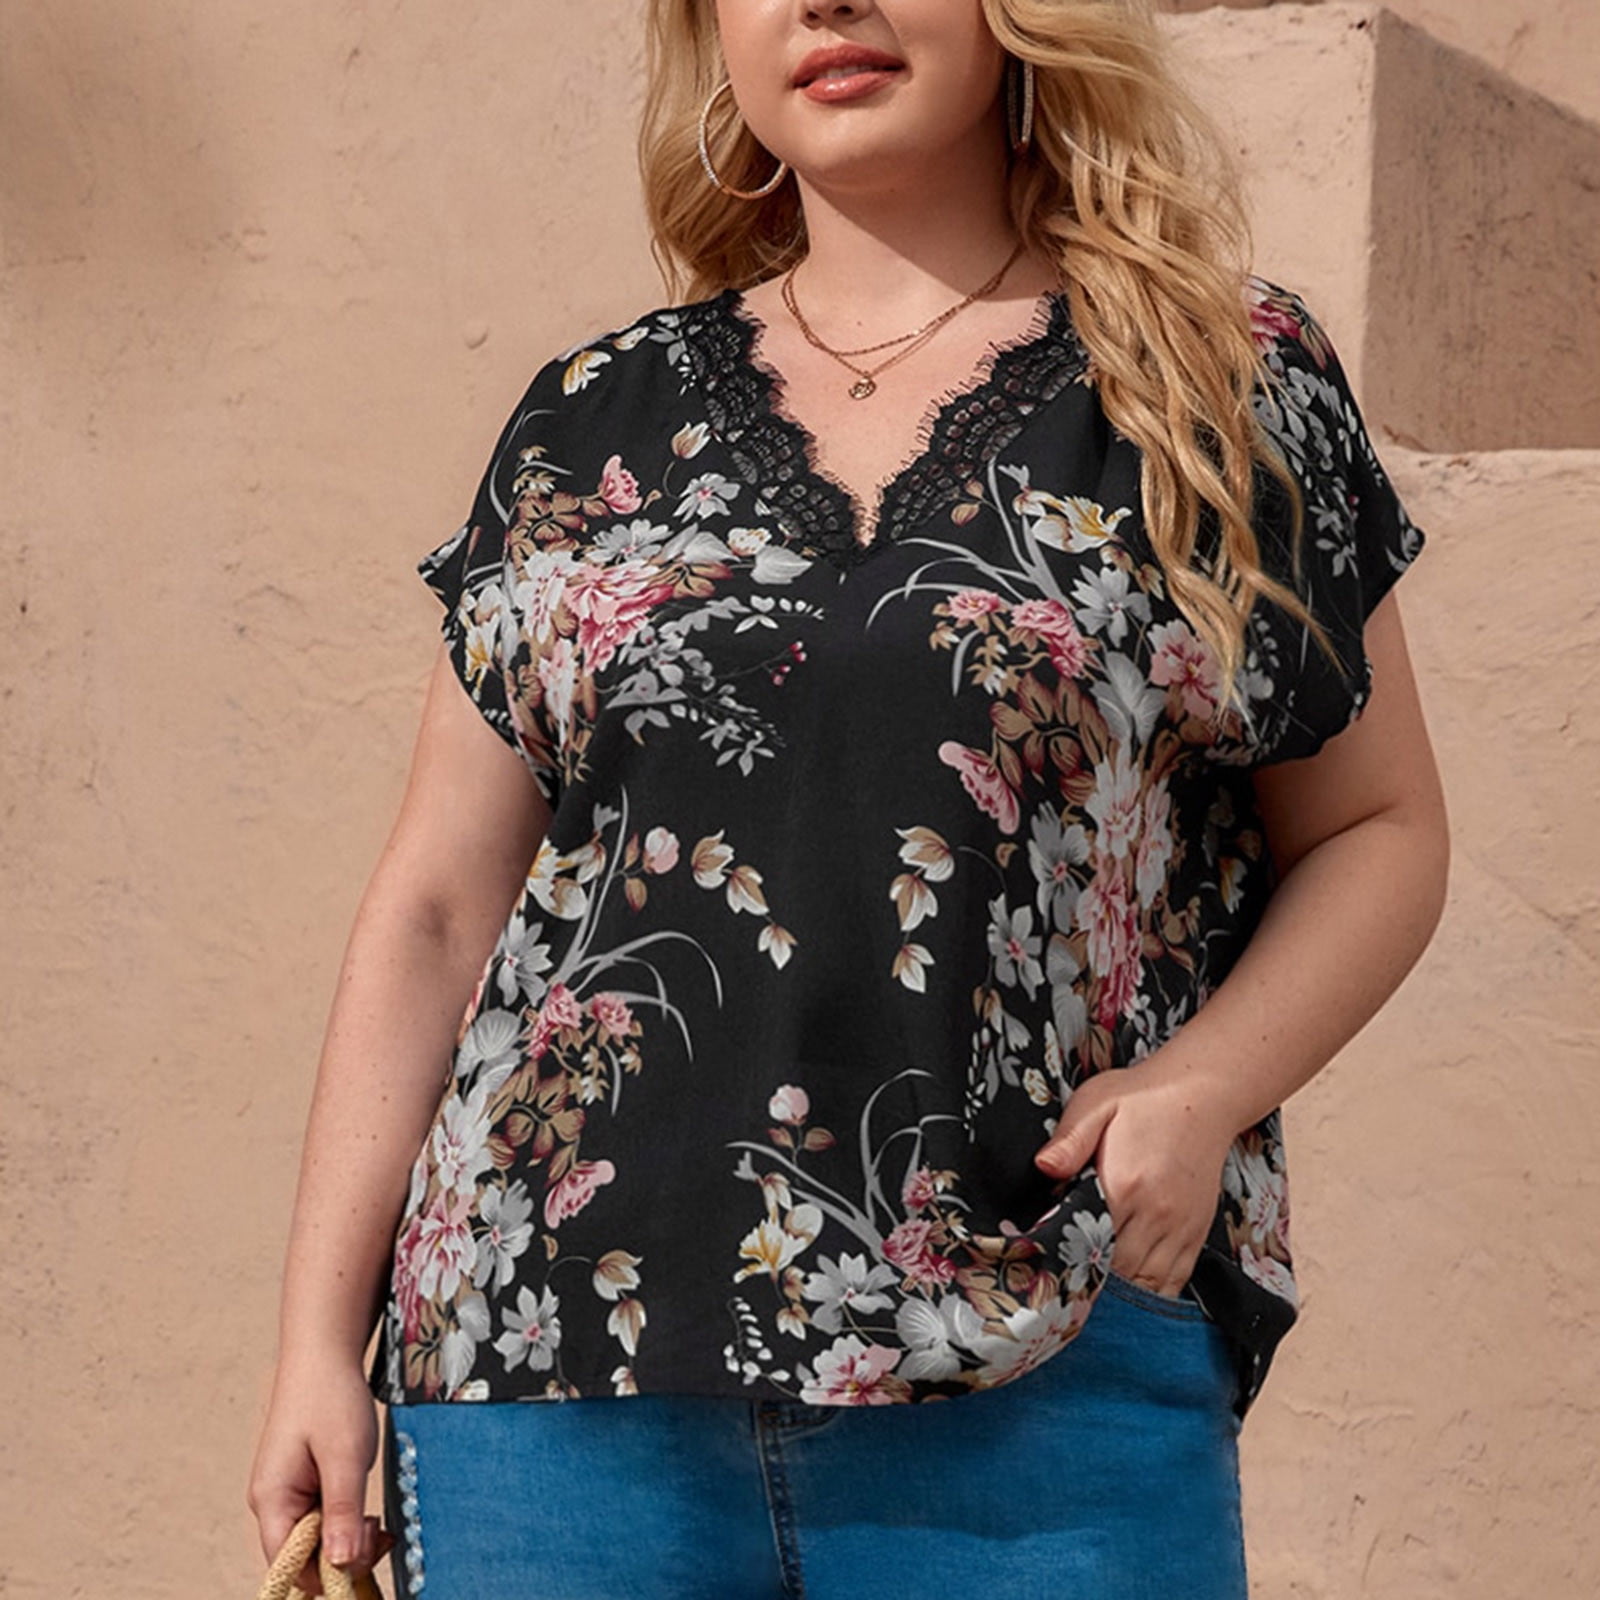 Njoeus Plus Size Tops For Women Blouses For Women Short Fashion Woman Casual V-Neck Solid Print T-Shirt Summer Plus Size Tops V Ladies Tops And Blouses On Clearance -